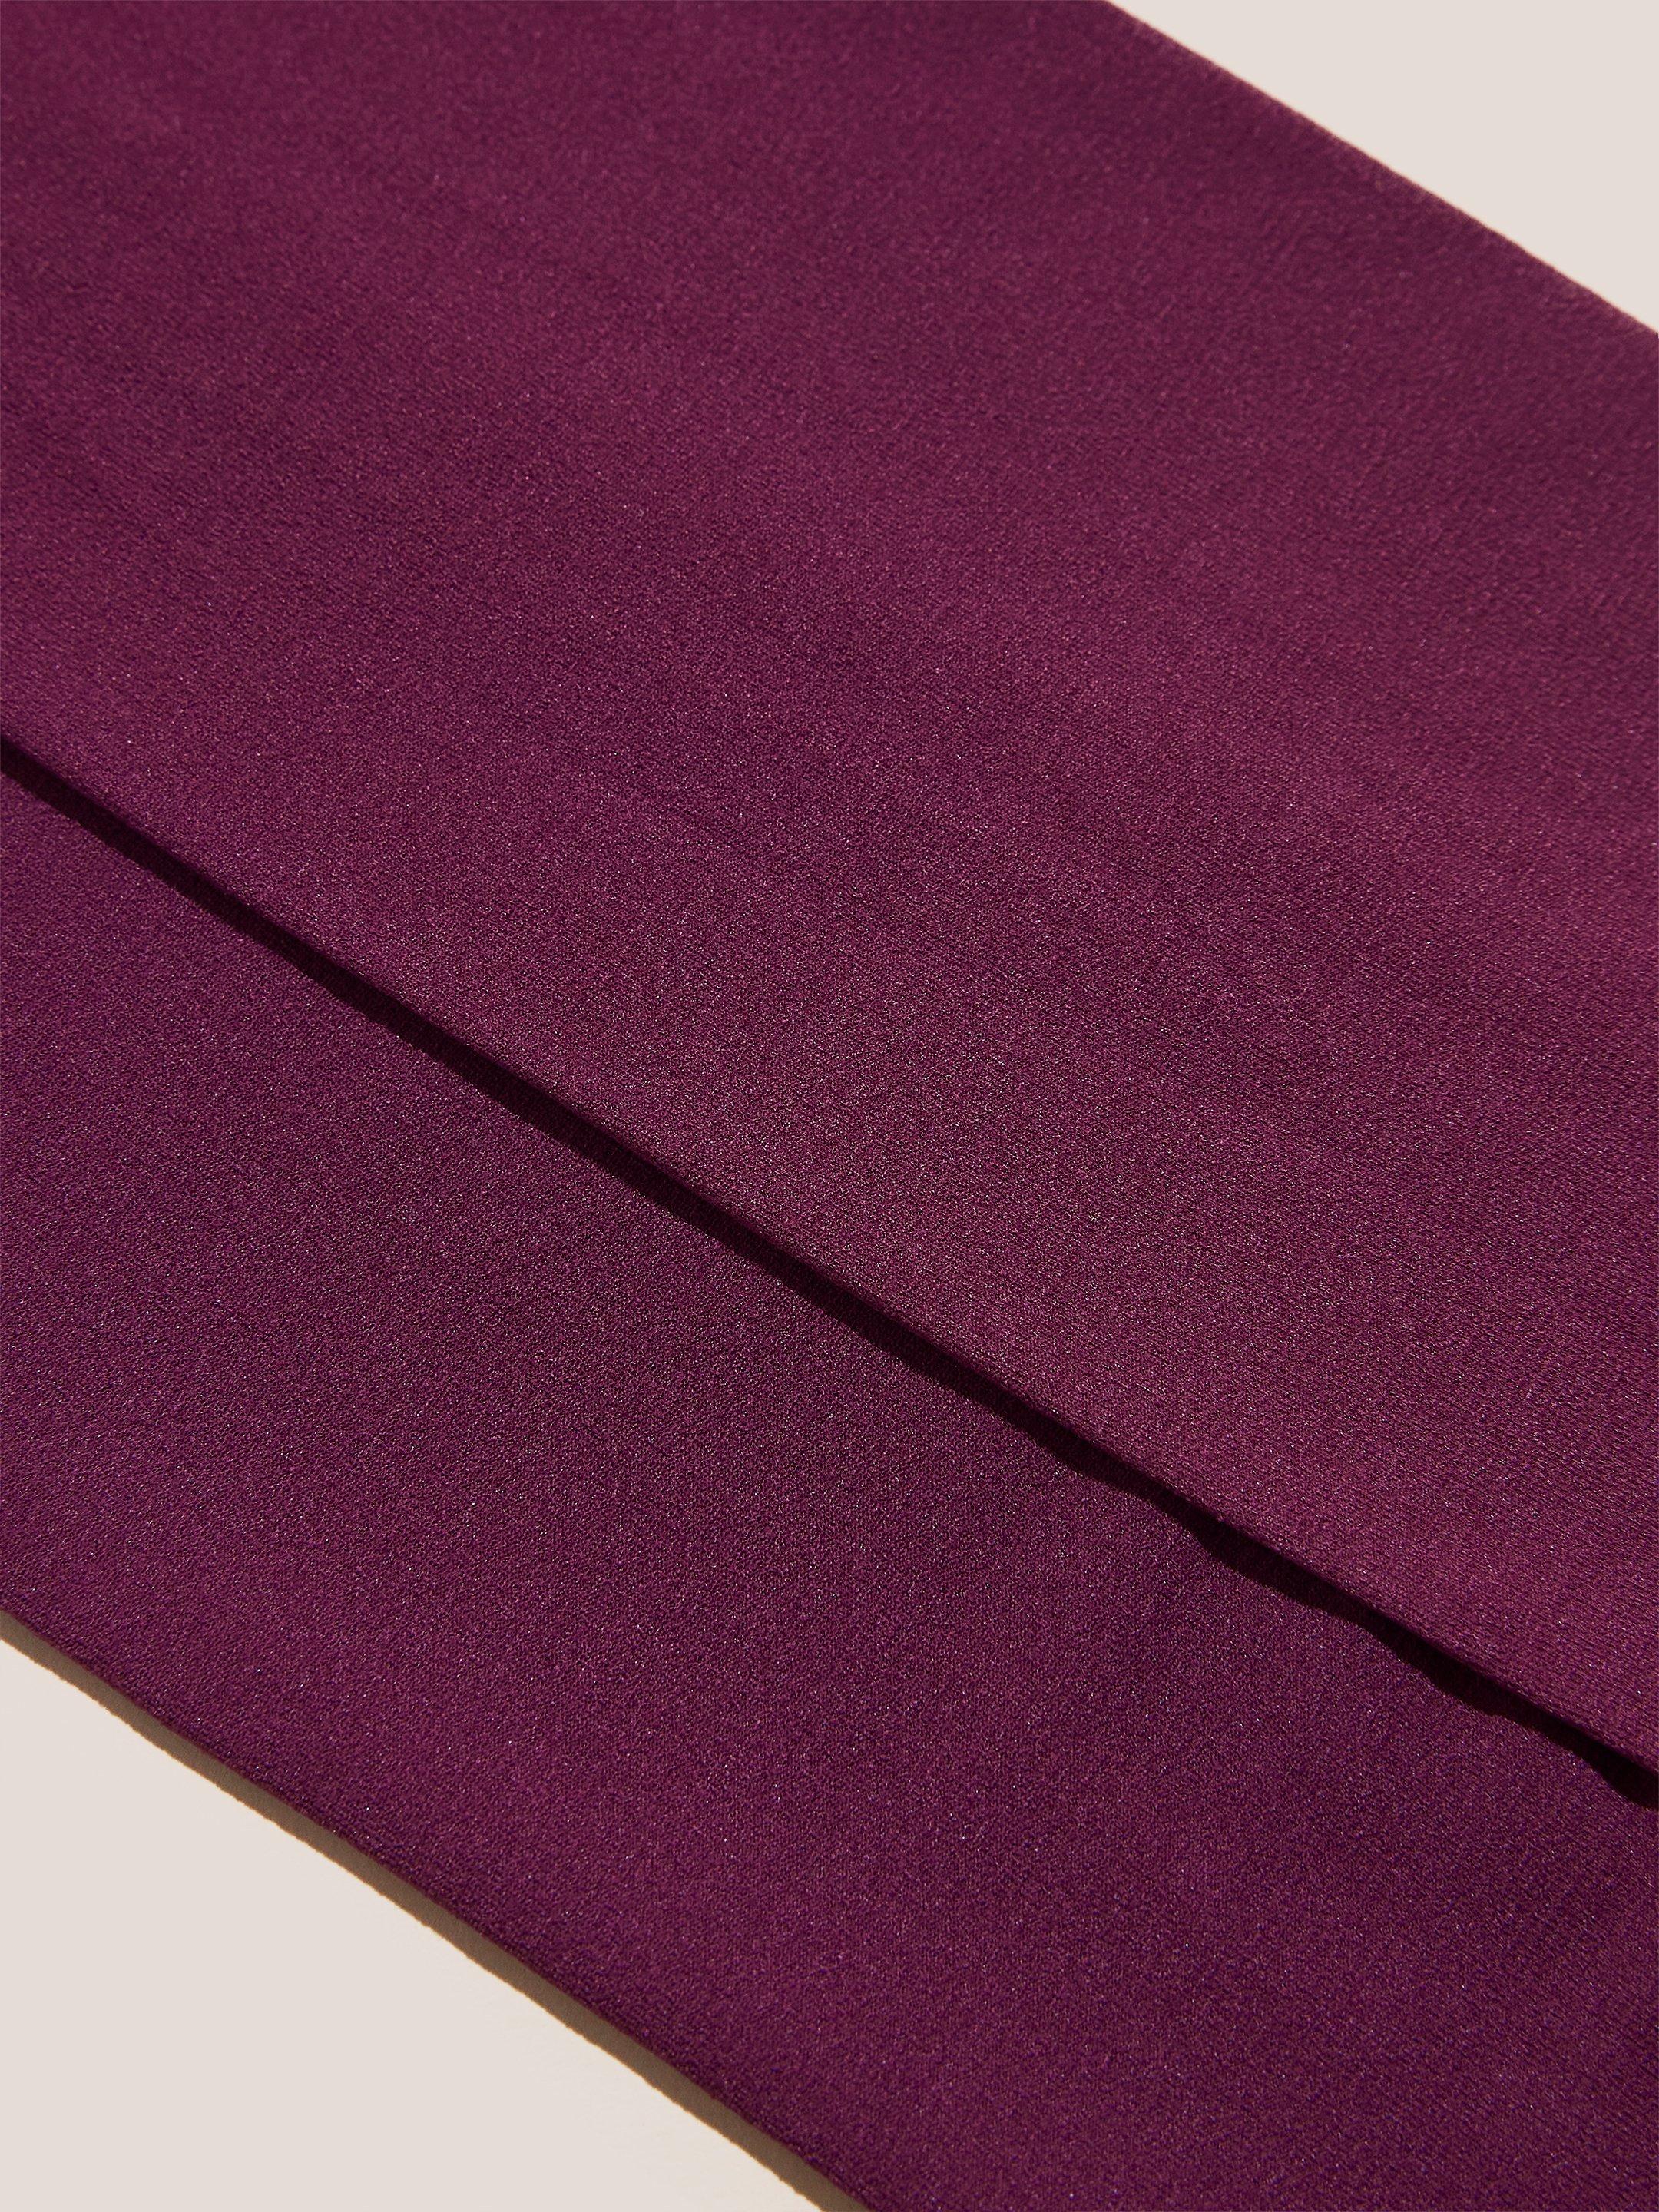 Olivia Opaque Tights in DK PLUM - FLAT DETAIL